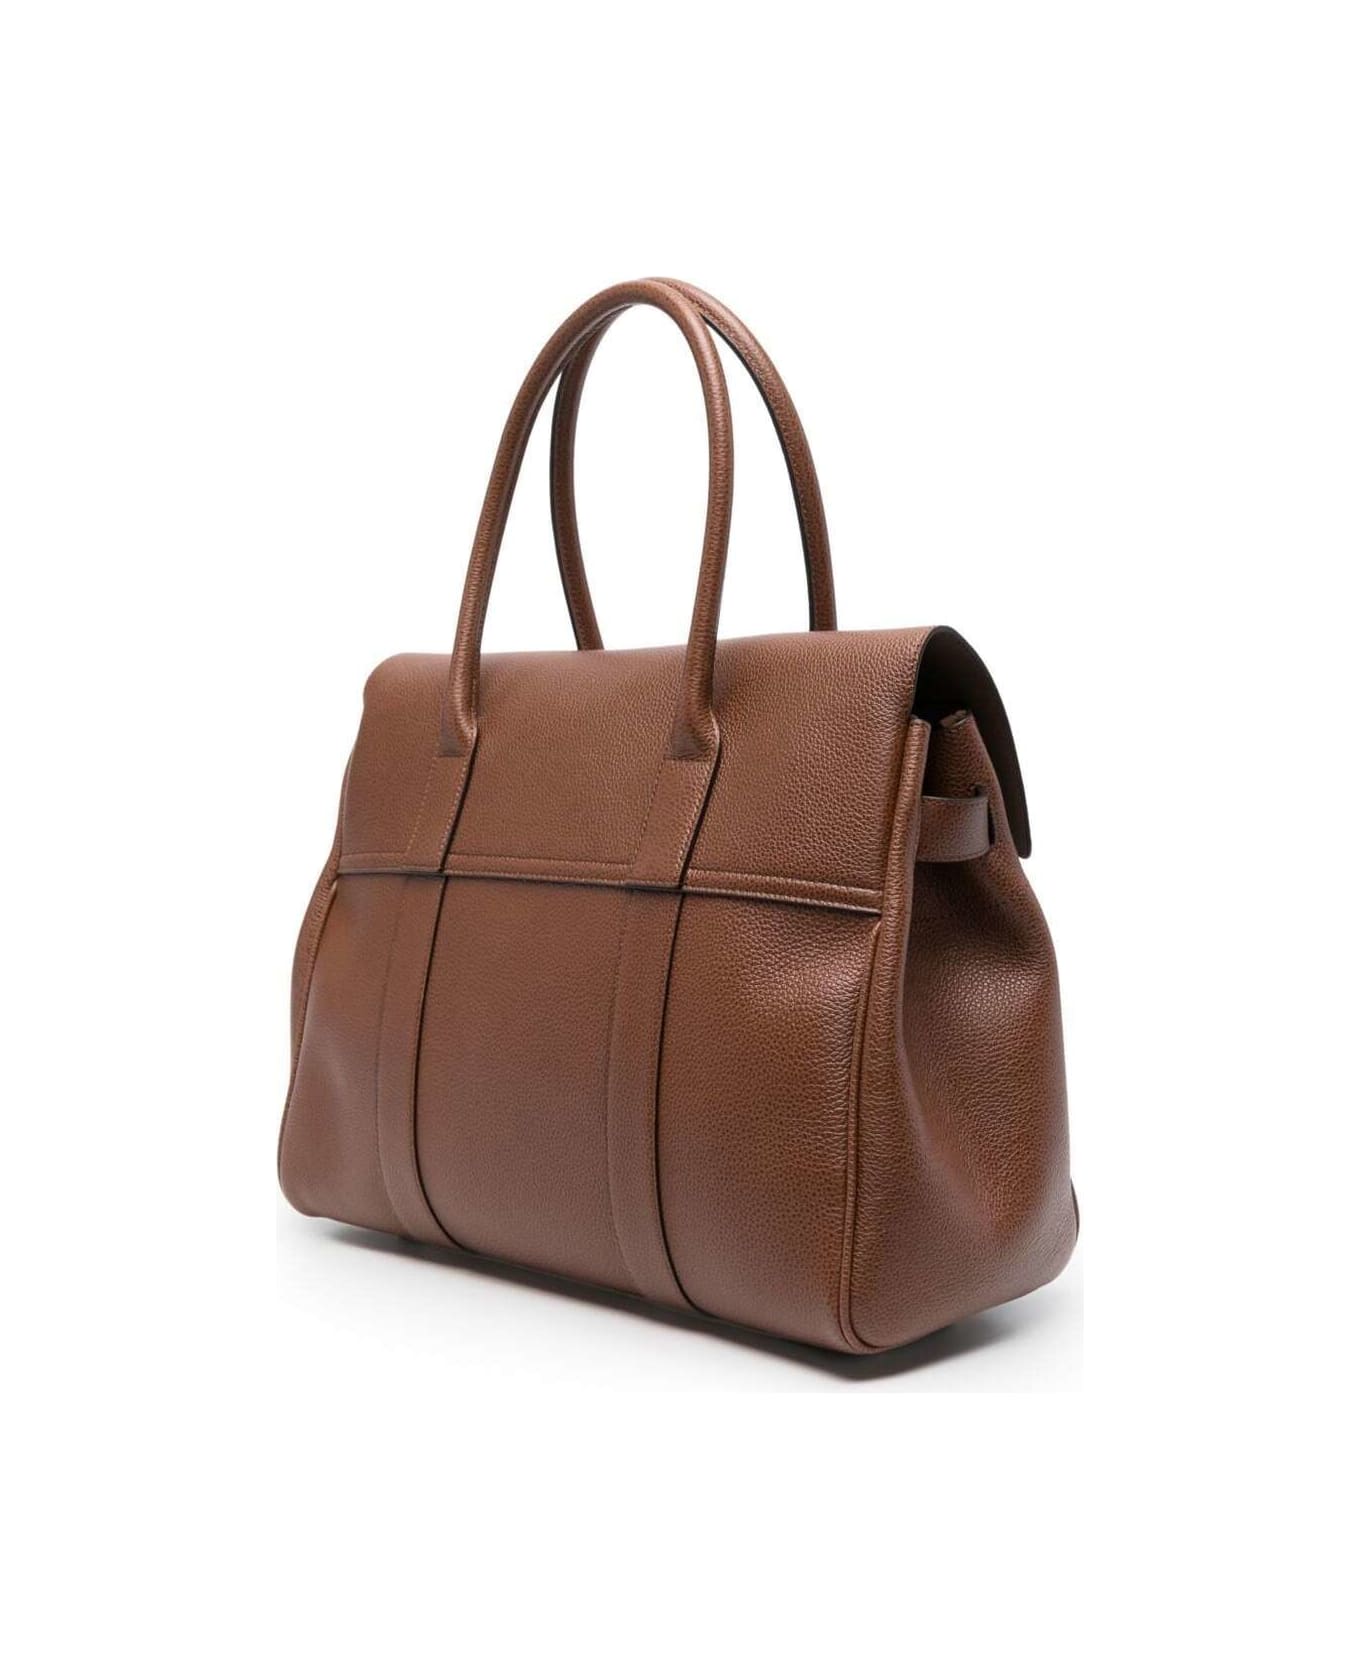 Mulberry Bayswater Brown Leather Handbag Mulberry Woman - Brown トートバッグ